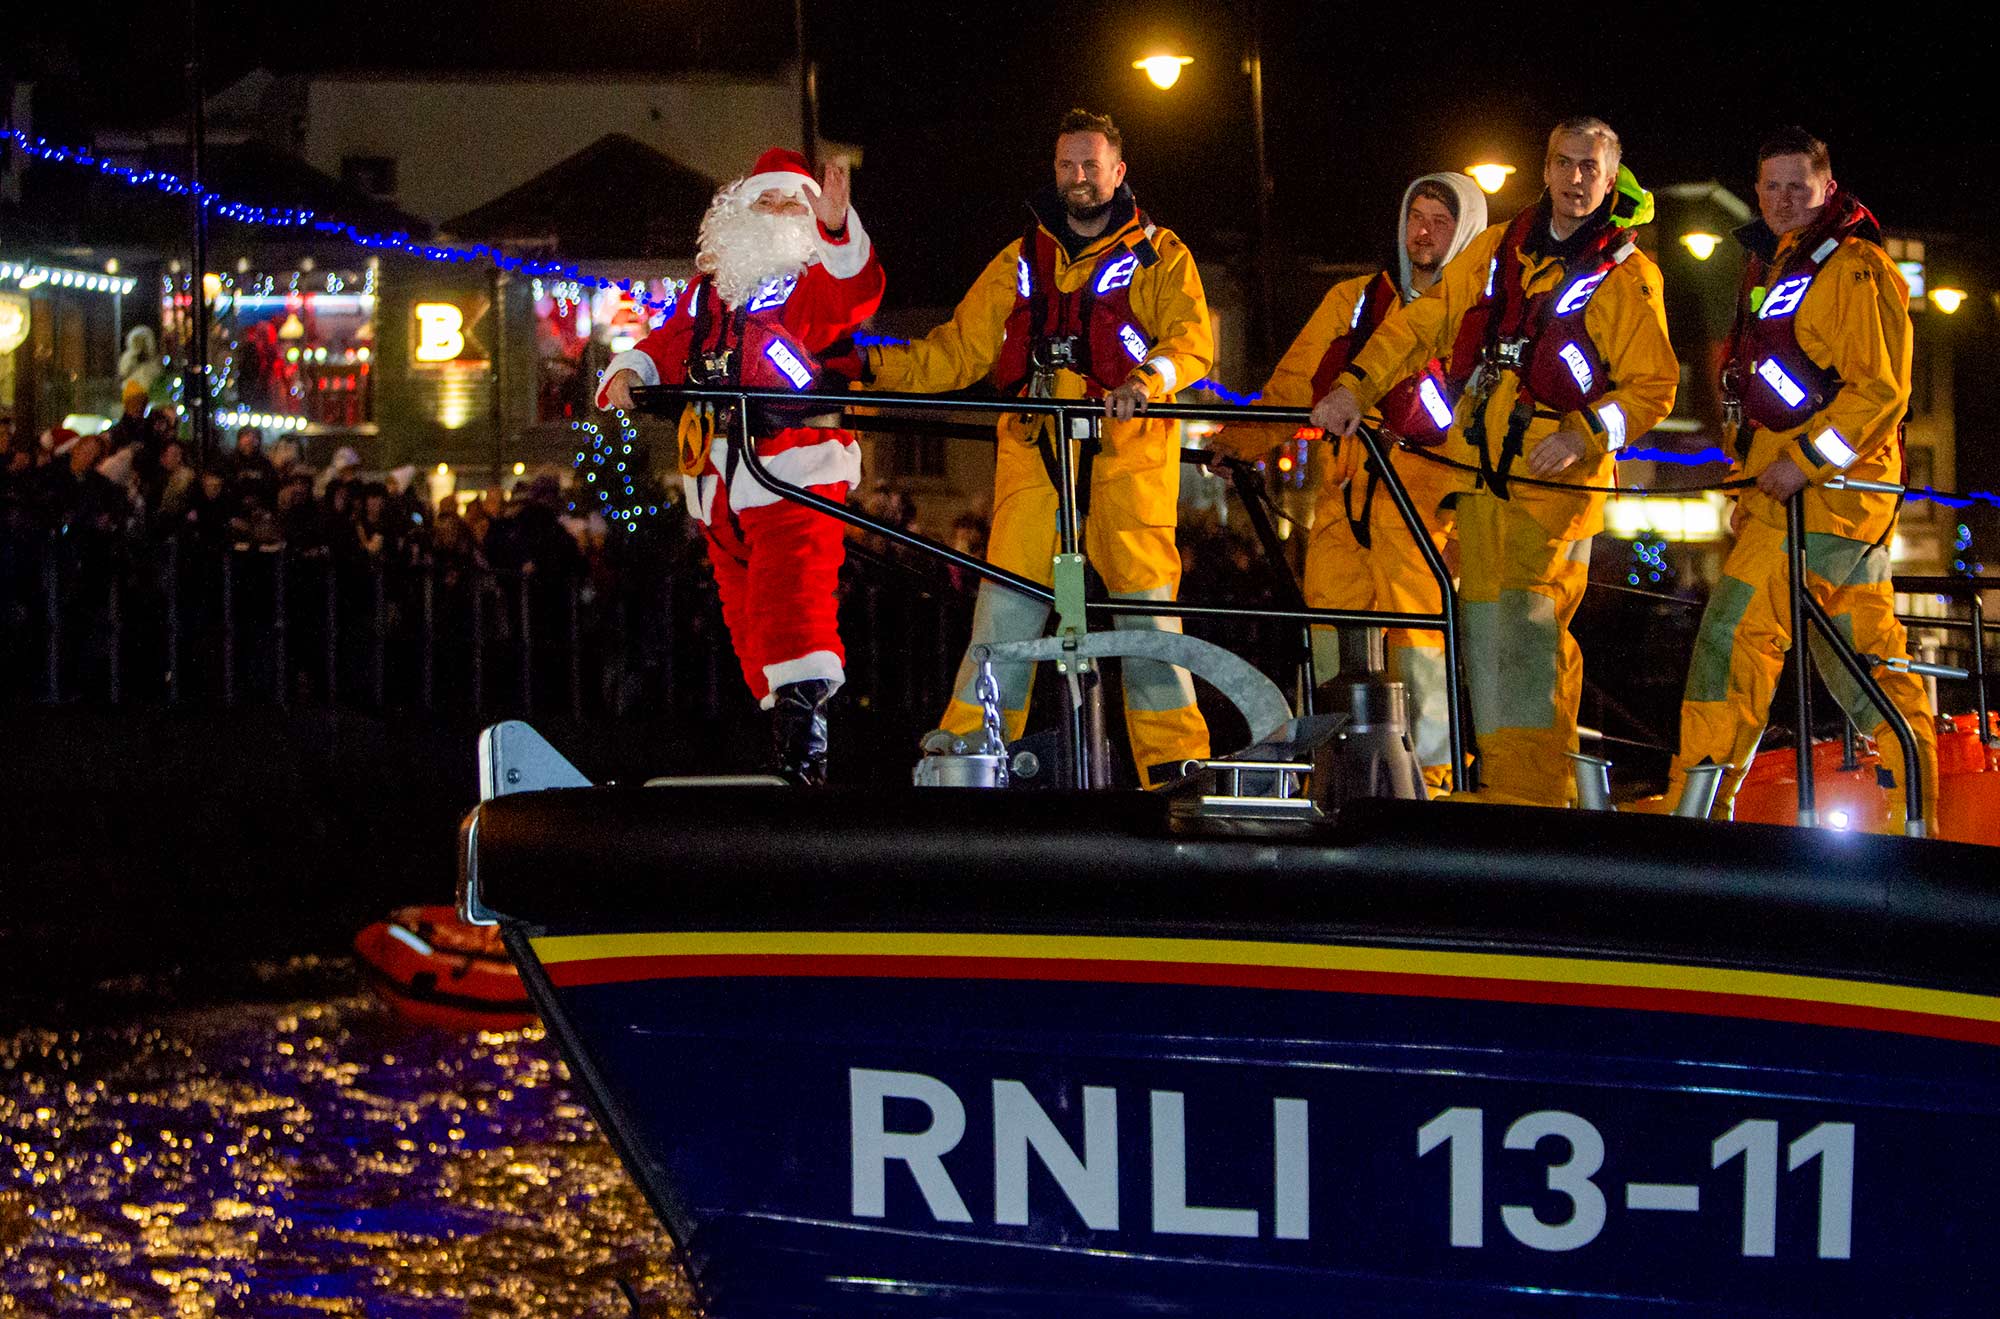 Father Christmas Arrival on the RNLI Lifeboat 2021